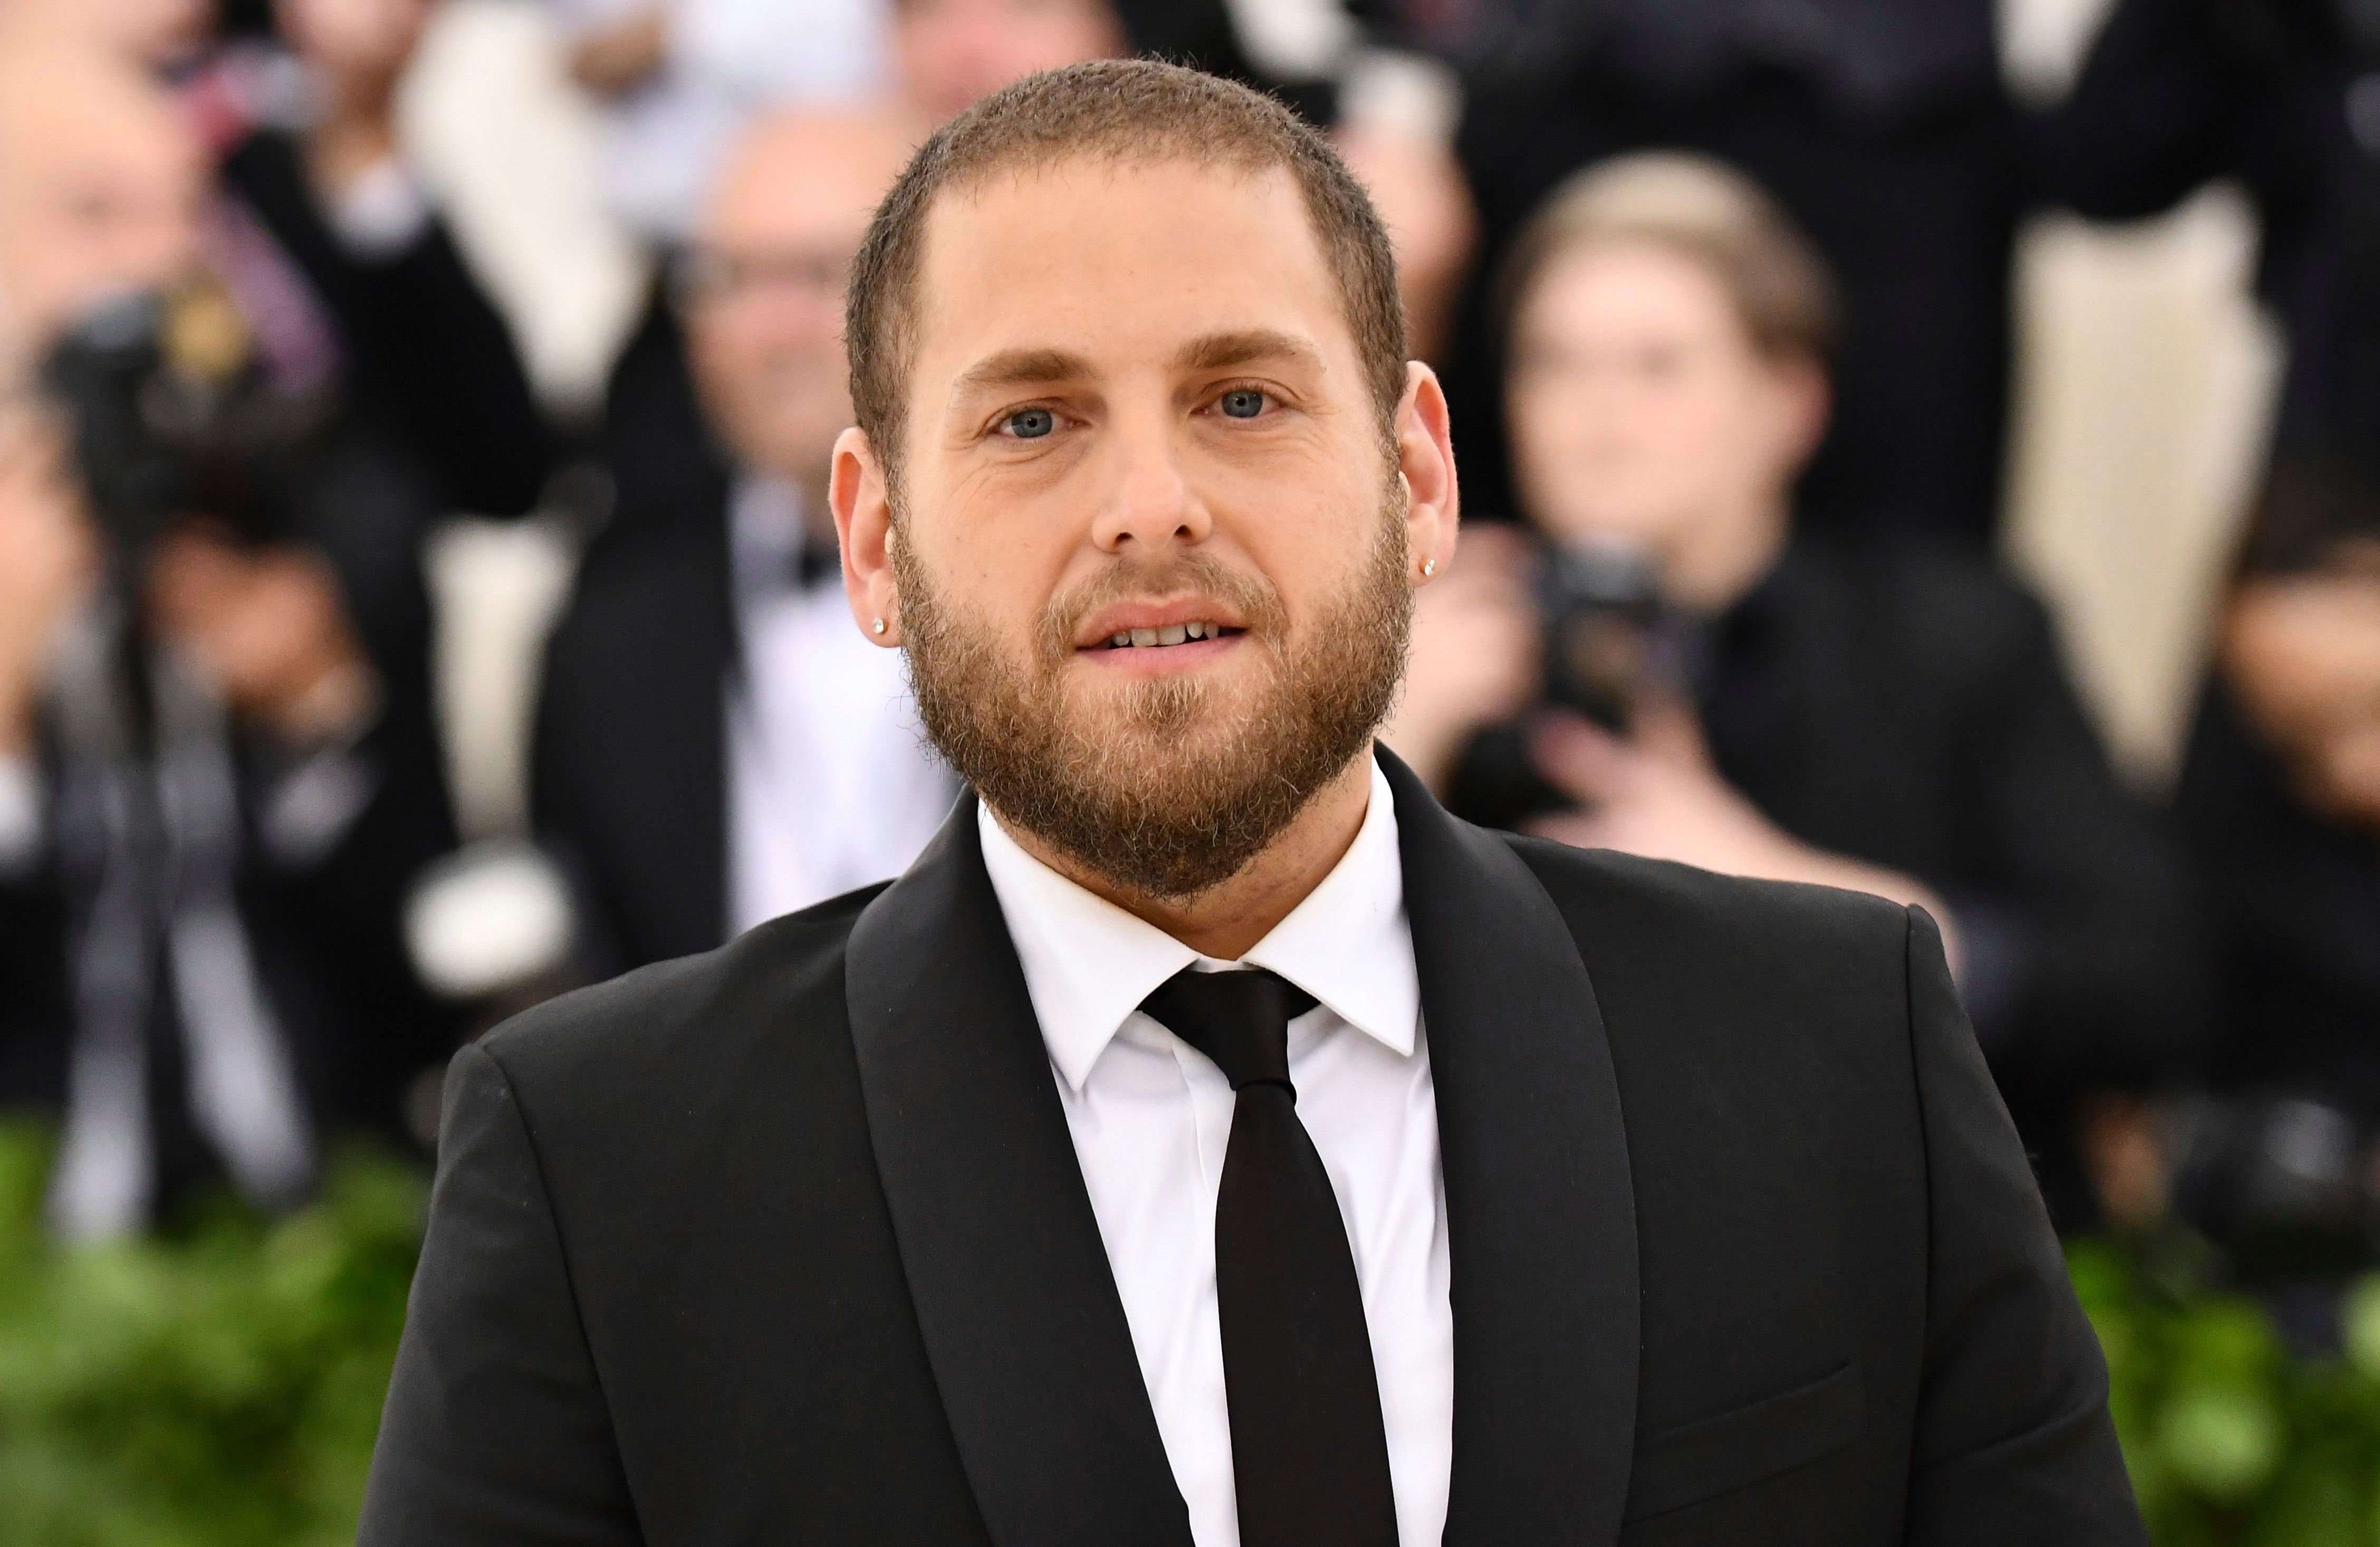 image for Jonah Hill Had a Four-Hour Meeting With Martin Scorsese, Got Advice From Ethan Coen Before Directing ‘Mid90s’